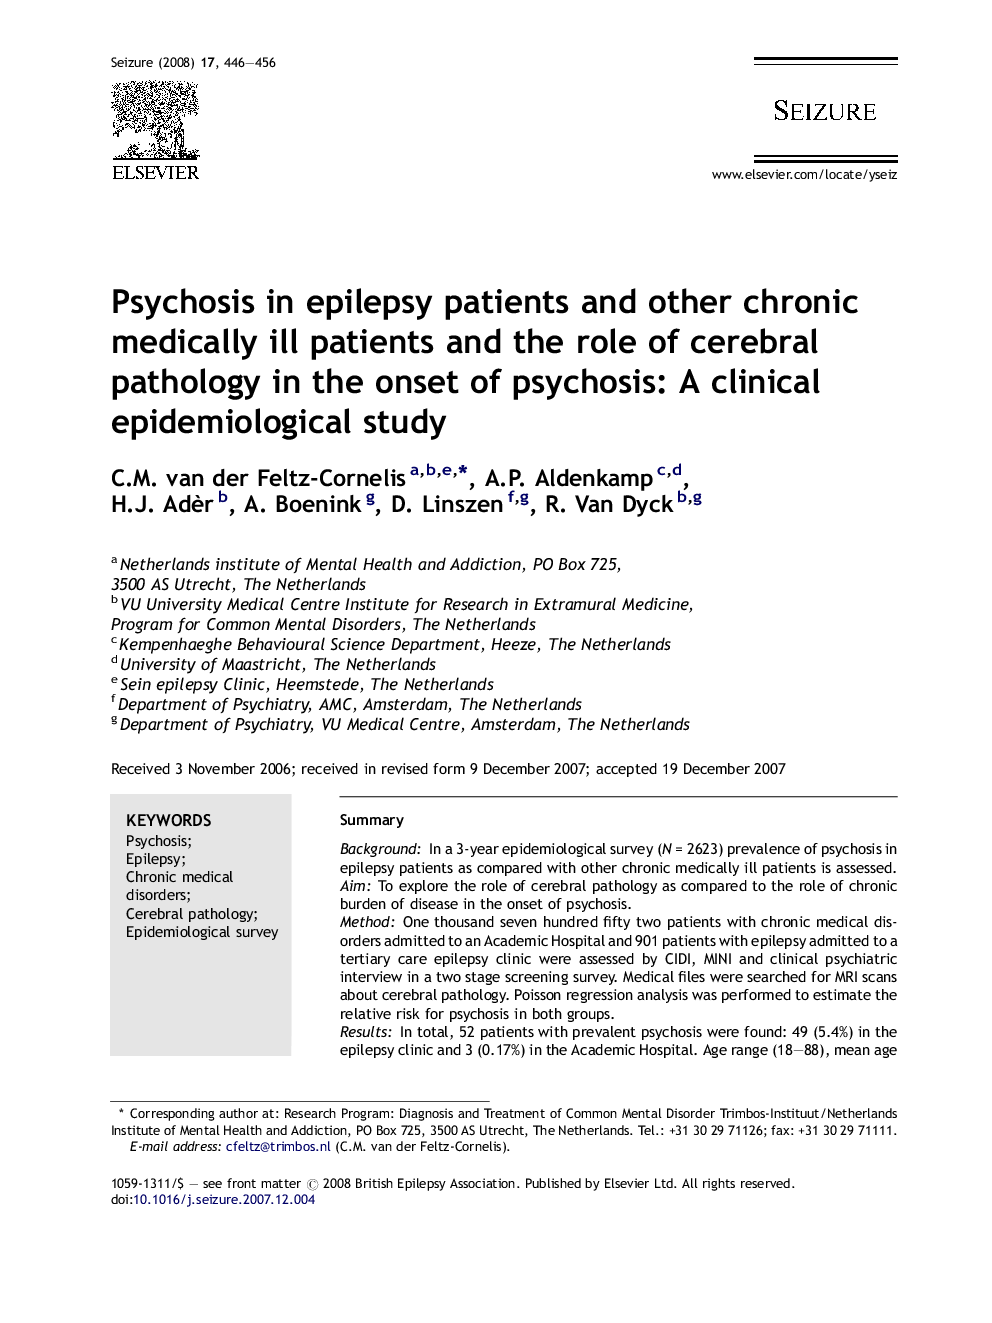 Psychosis in epilepsy patients and other chronic medically ill patients and the role of cerebral pathology in the onset of psychosis: A clinical epidemiological study